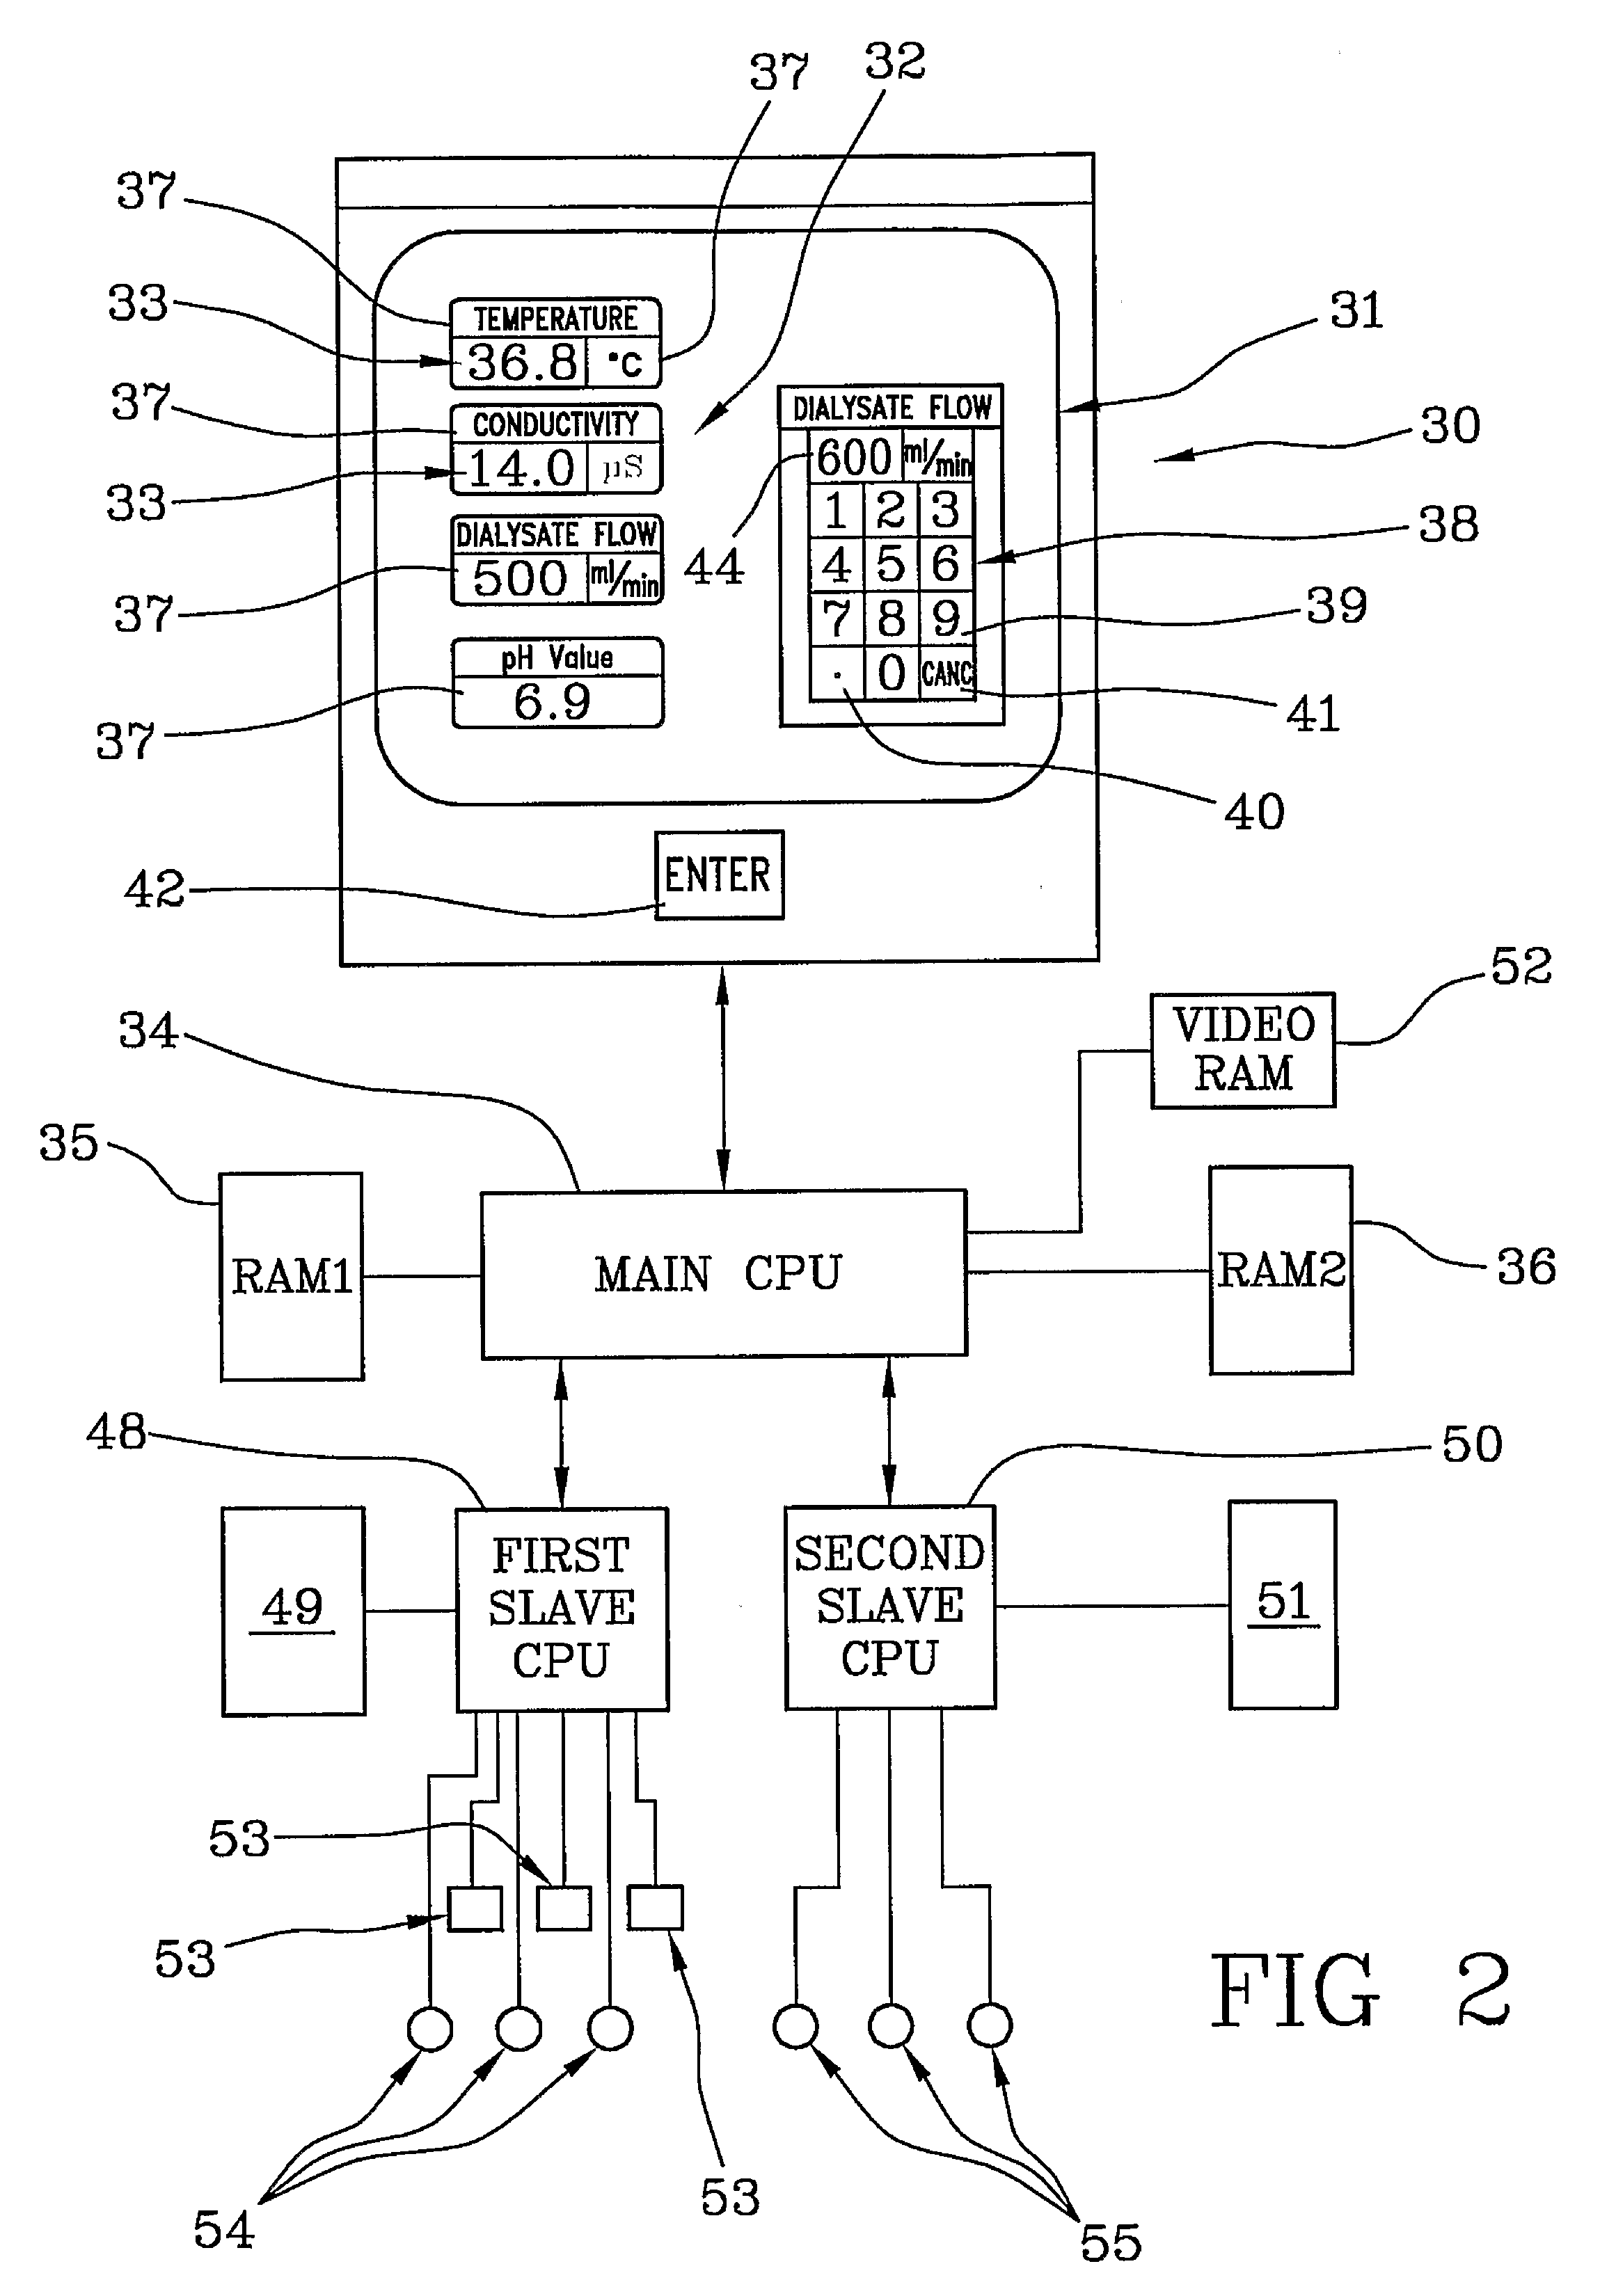 Medical apparatus and method for setting up a medical apparatus